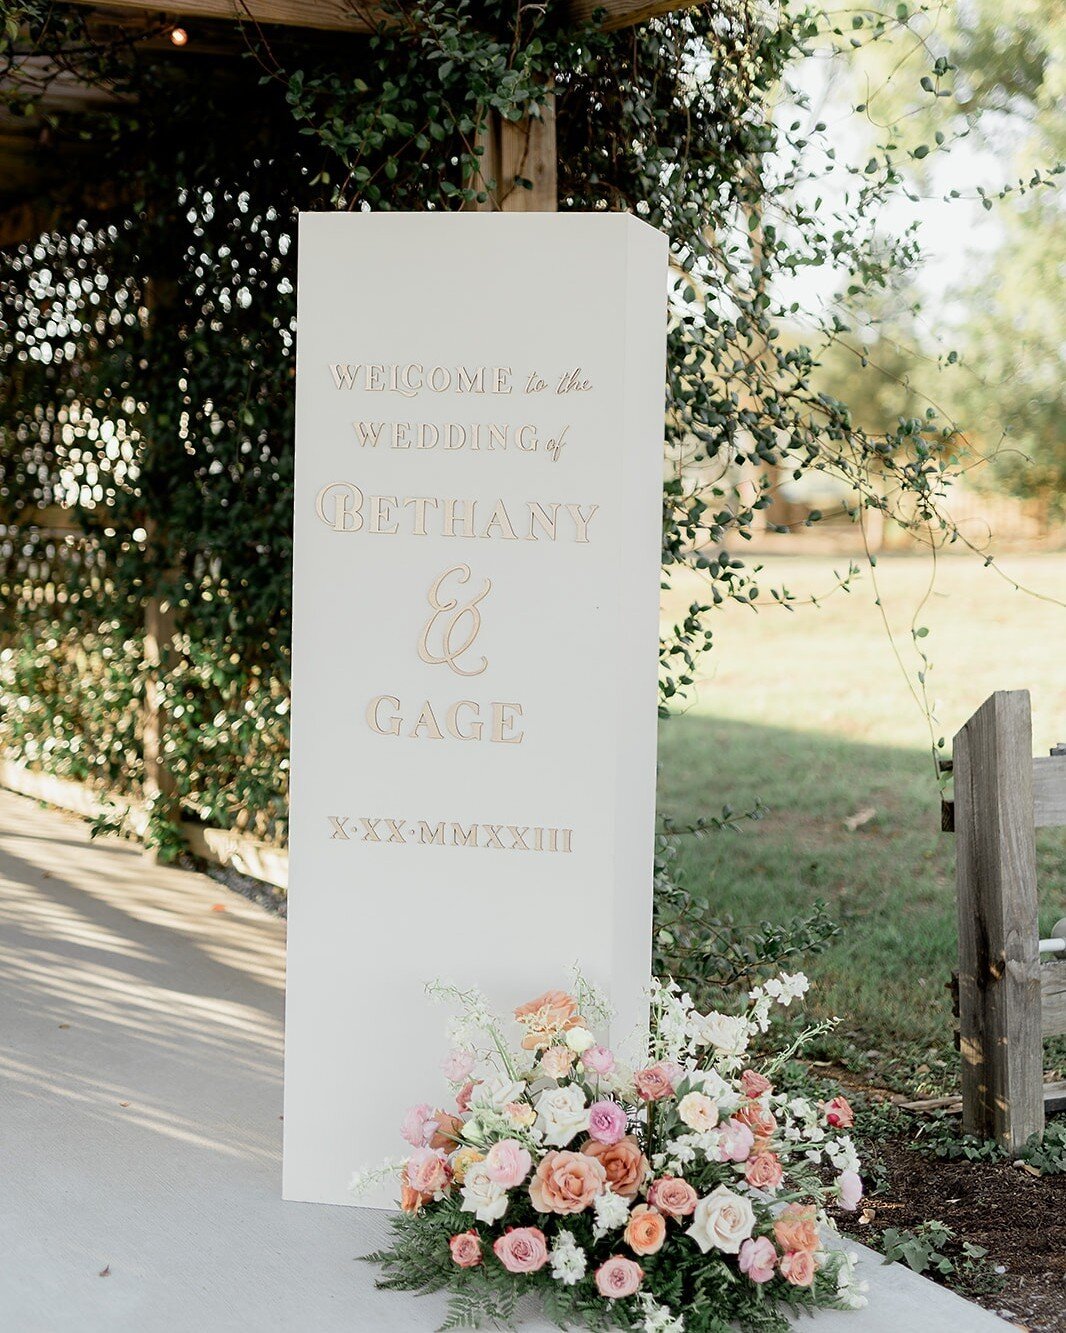 Wedding signage! It&rsquo;s something that sometimes gets forgotten about because it&rsquo;s one of those &ldquo;little&rdquo; things that you can do later! But they are important! 

Here&rsquo;s some of the signs you may want to get:
&bull; Welcome 